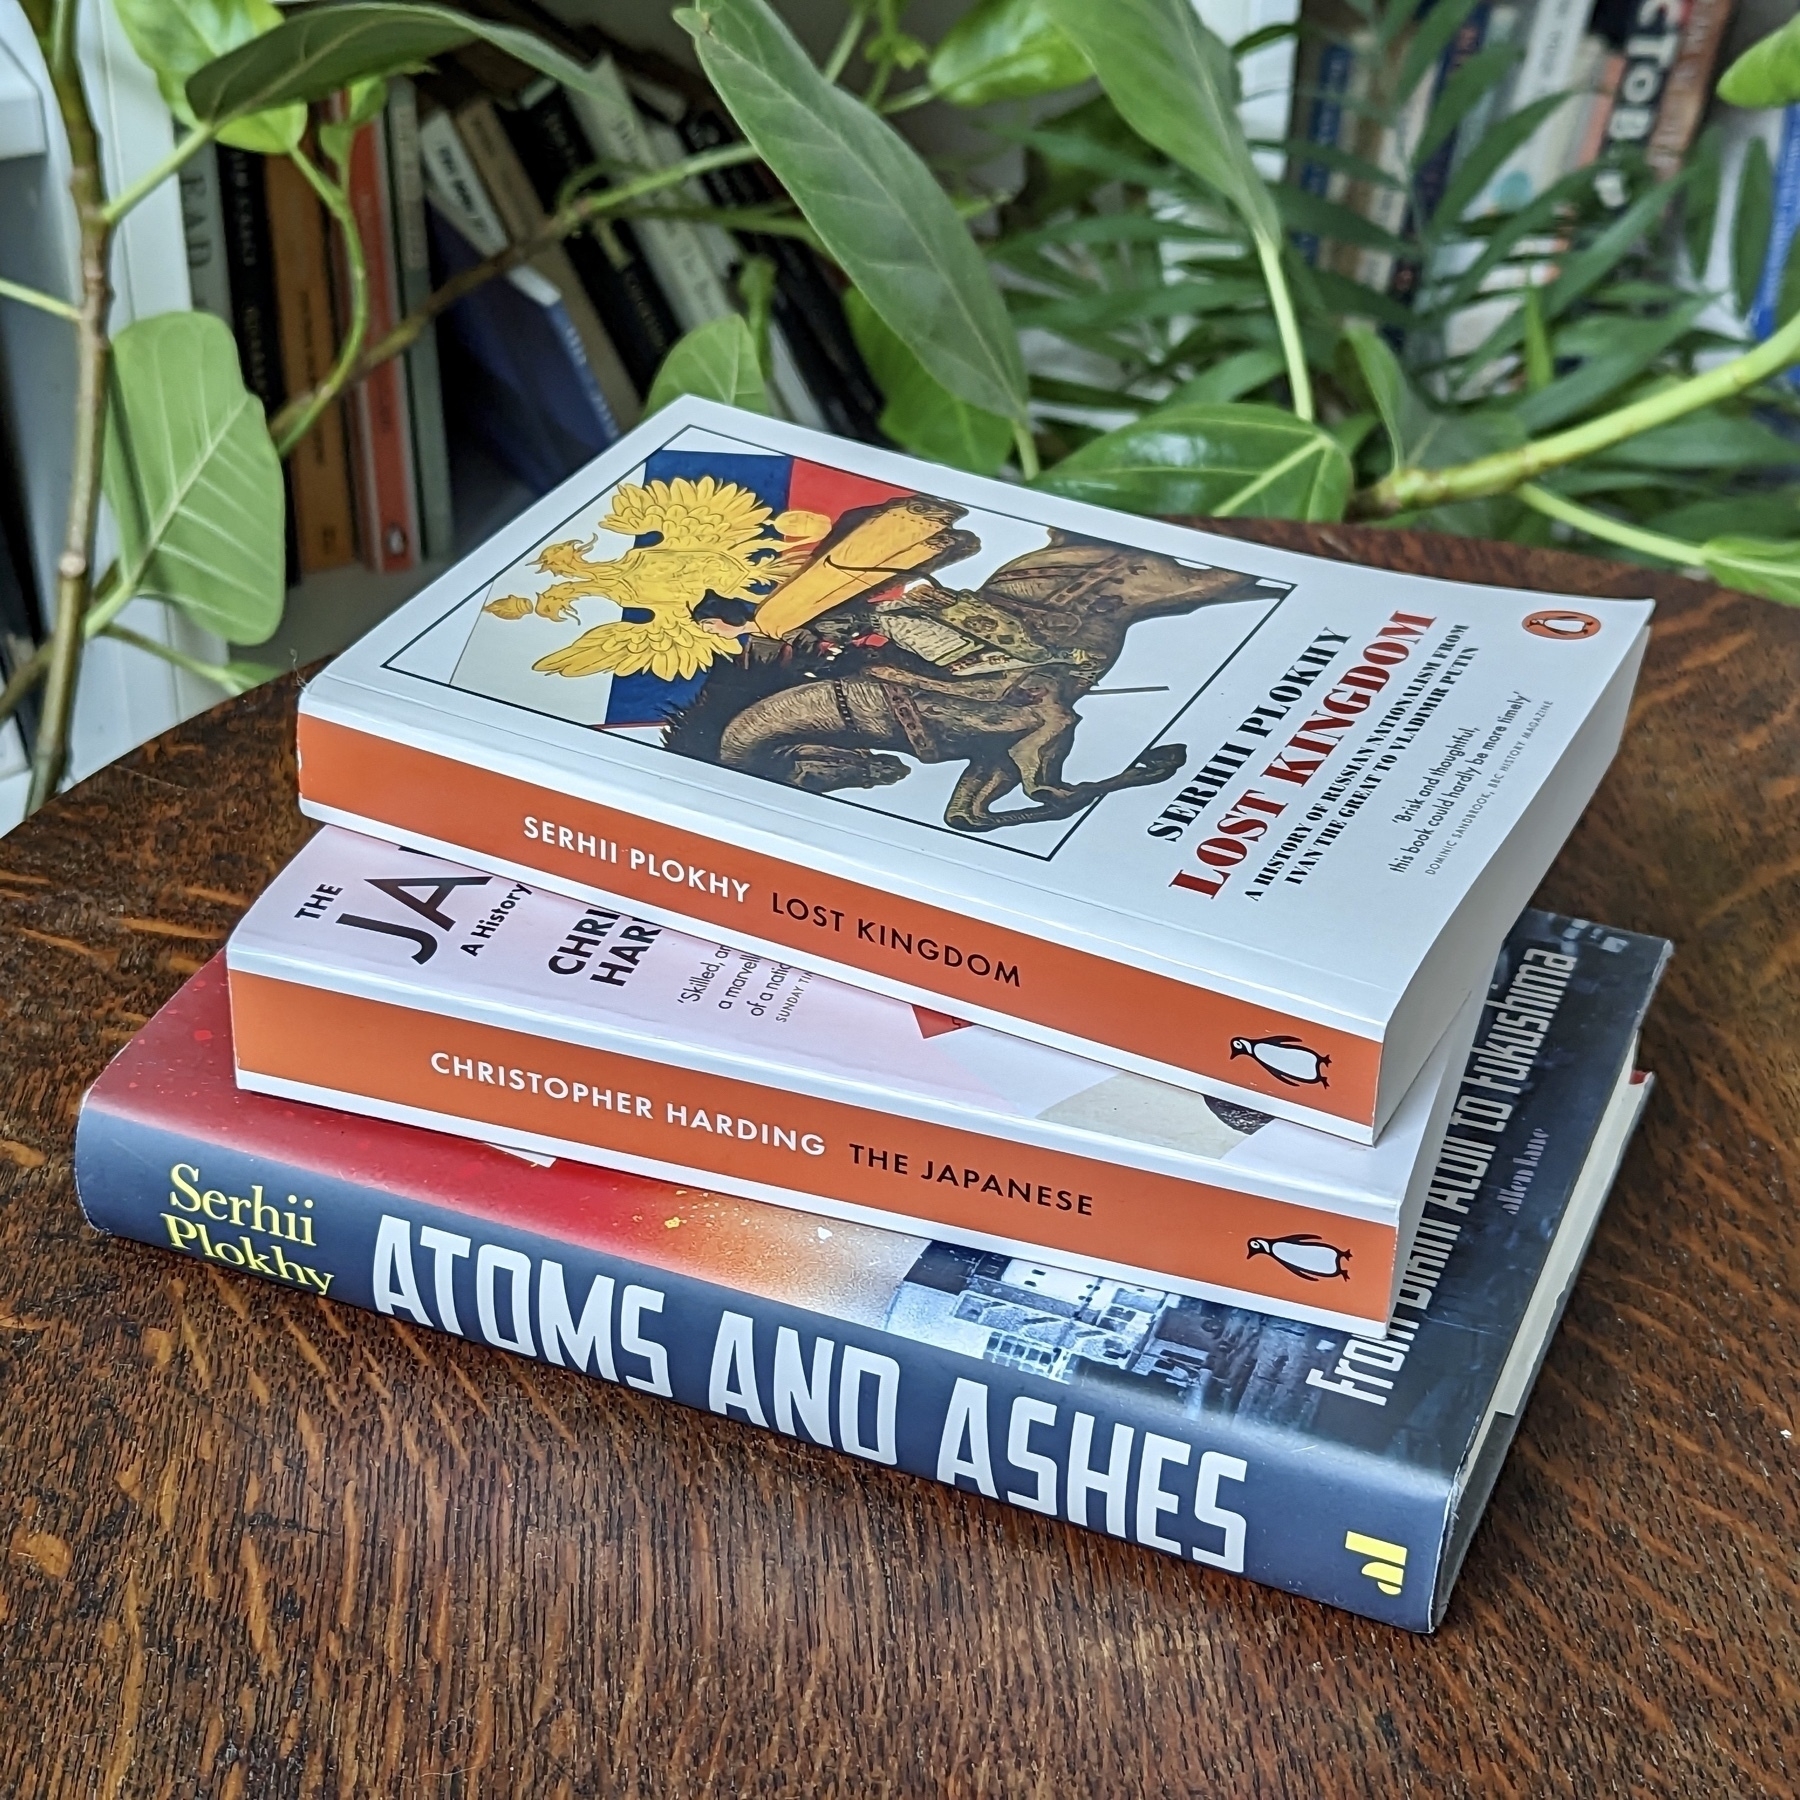 A small pile of three books on a wooden table.